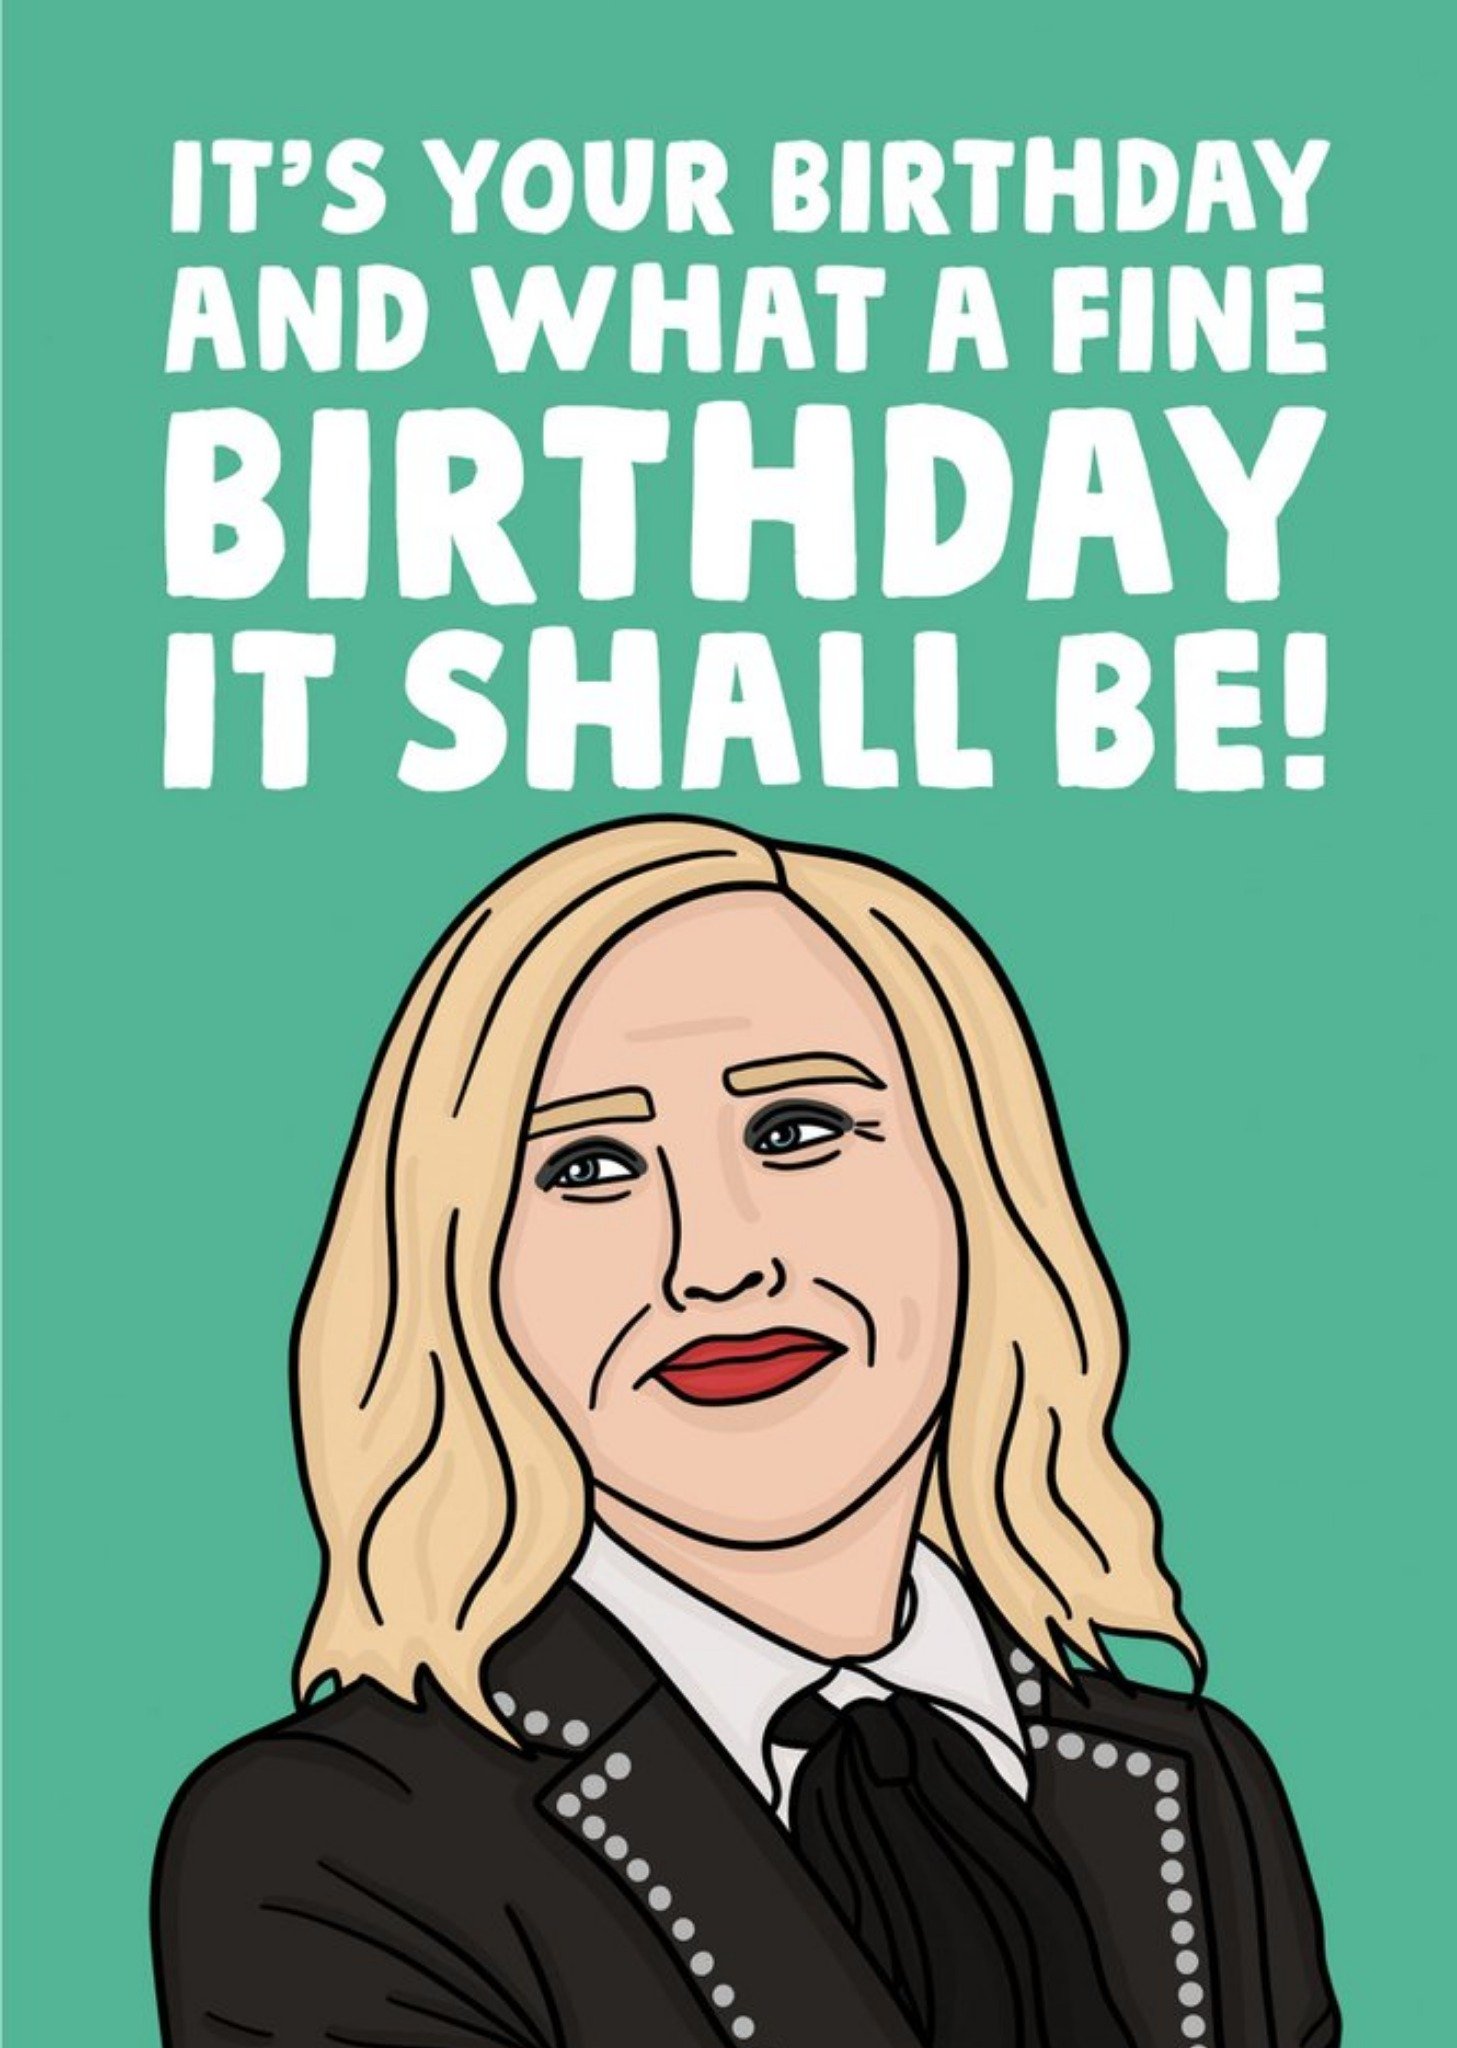 Moonpig Funny Spoof What A Fine Birthday It Shall Be Card Ecard